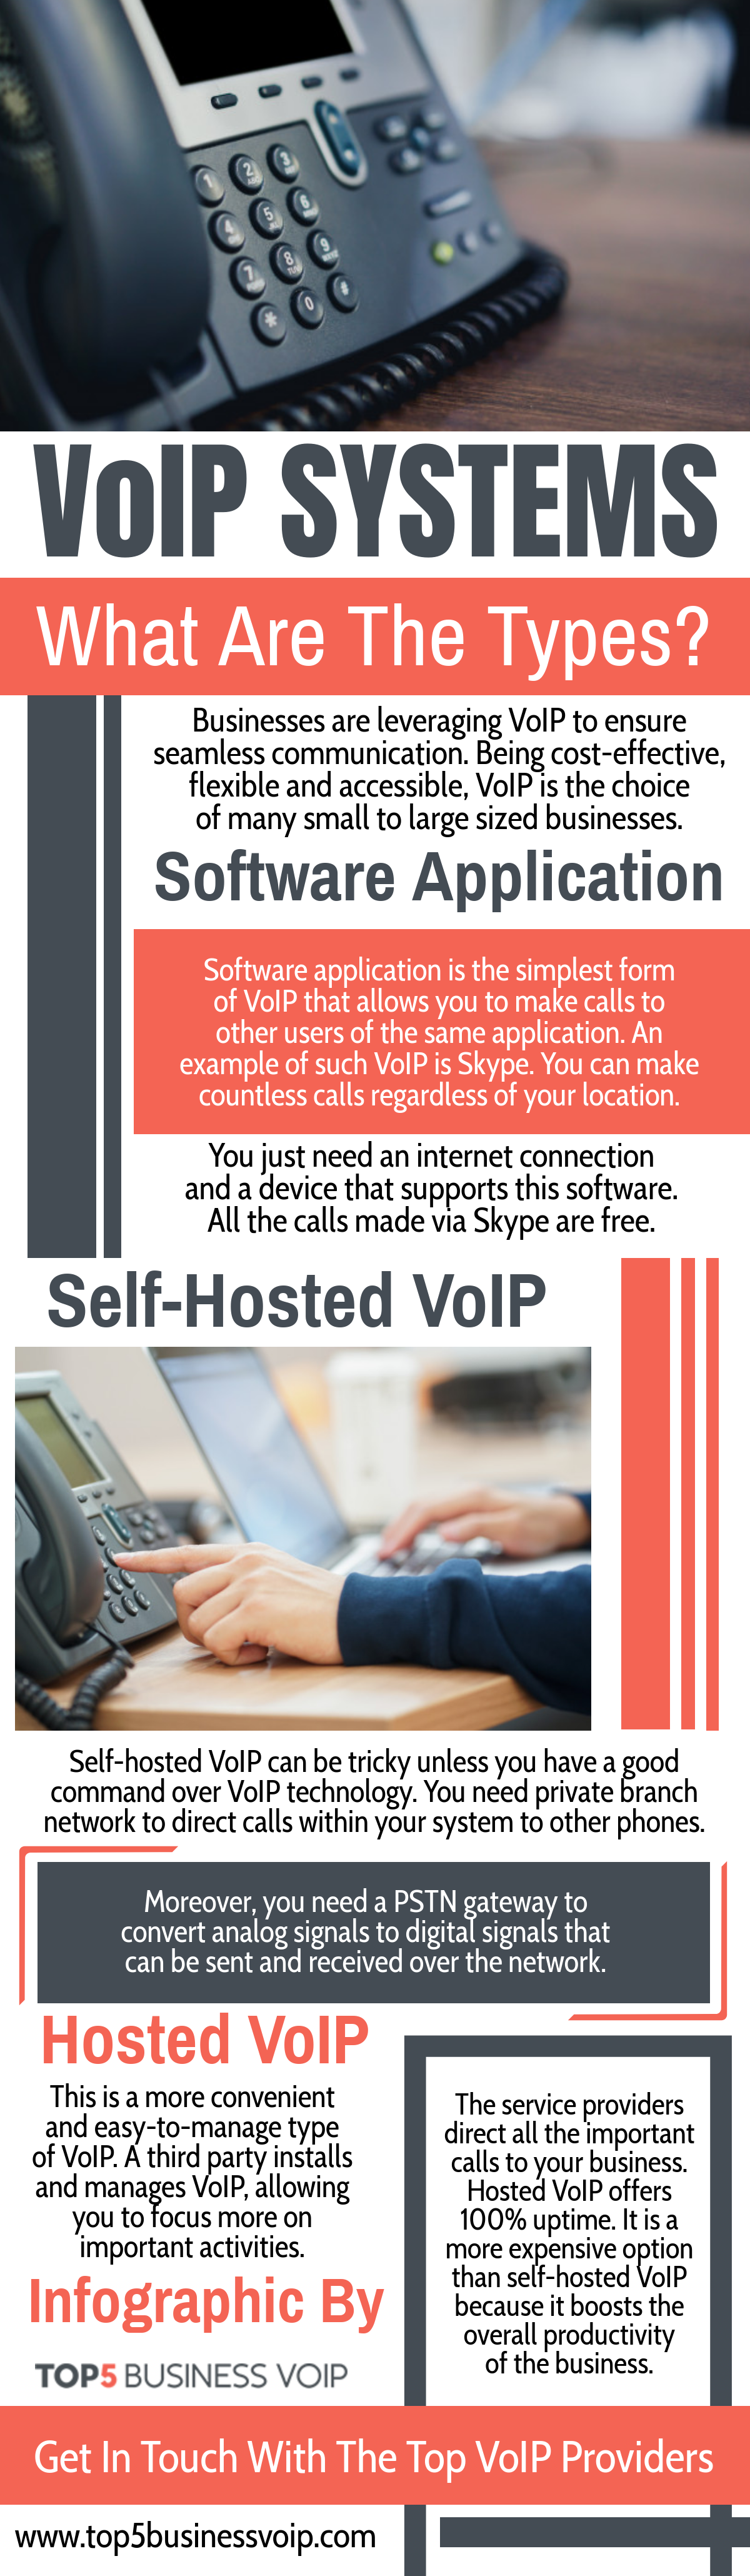 voip system types